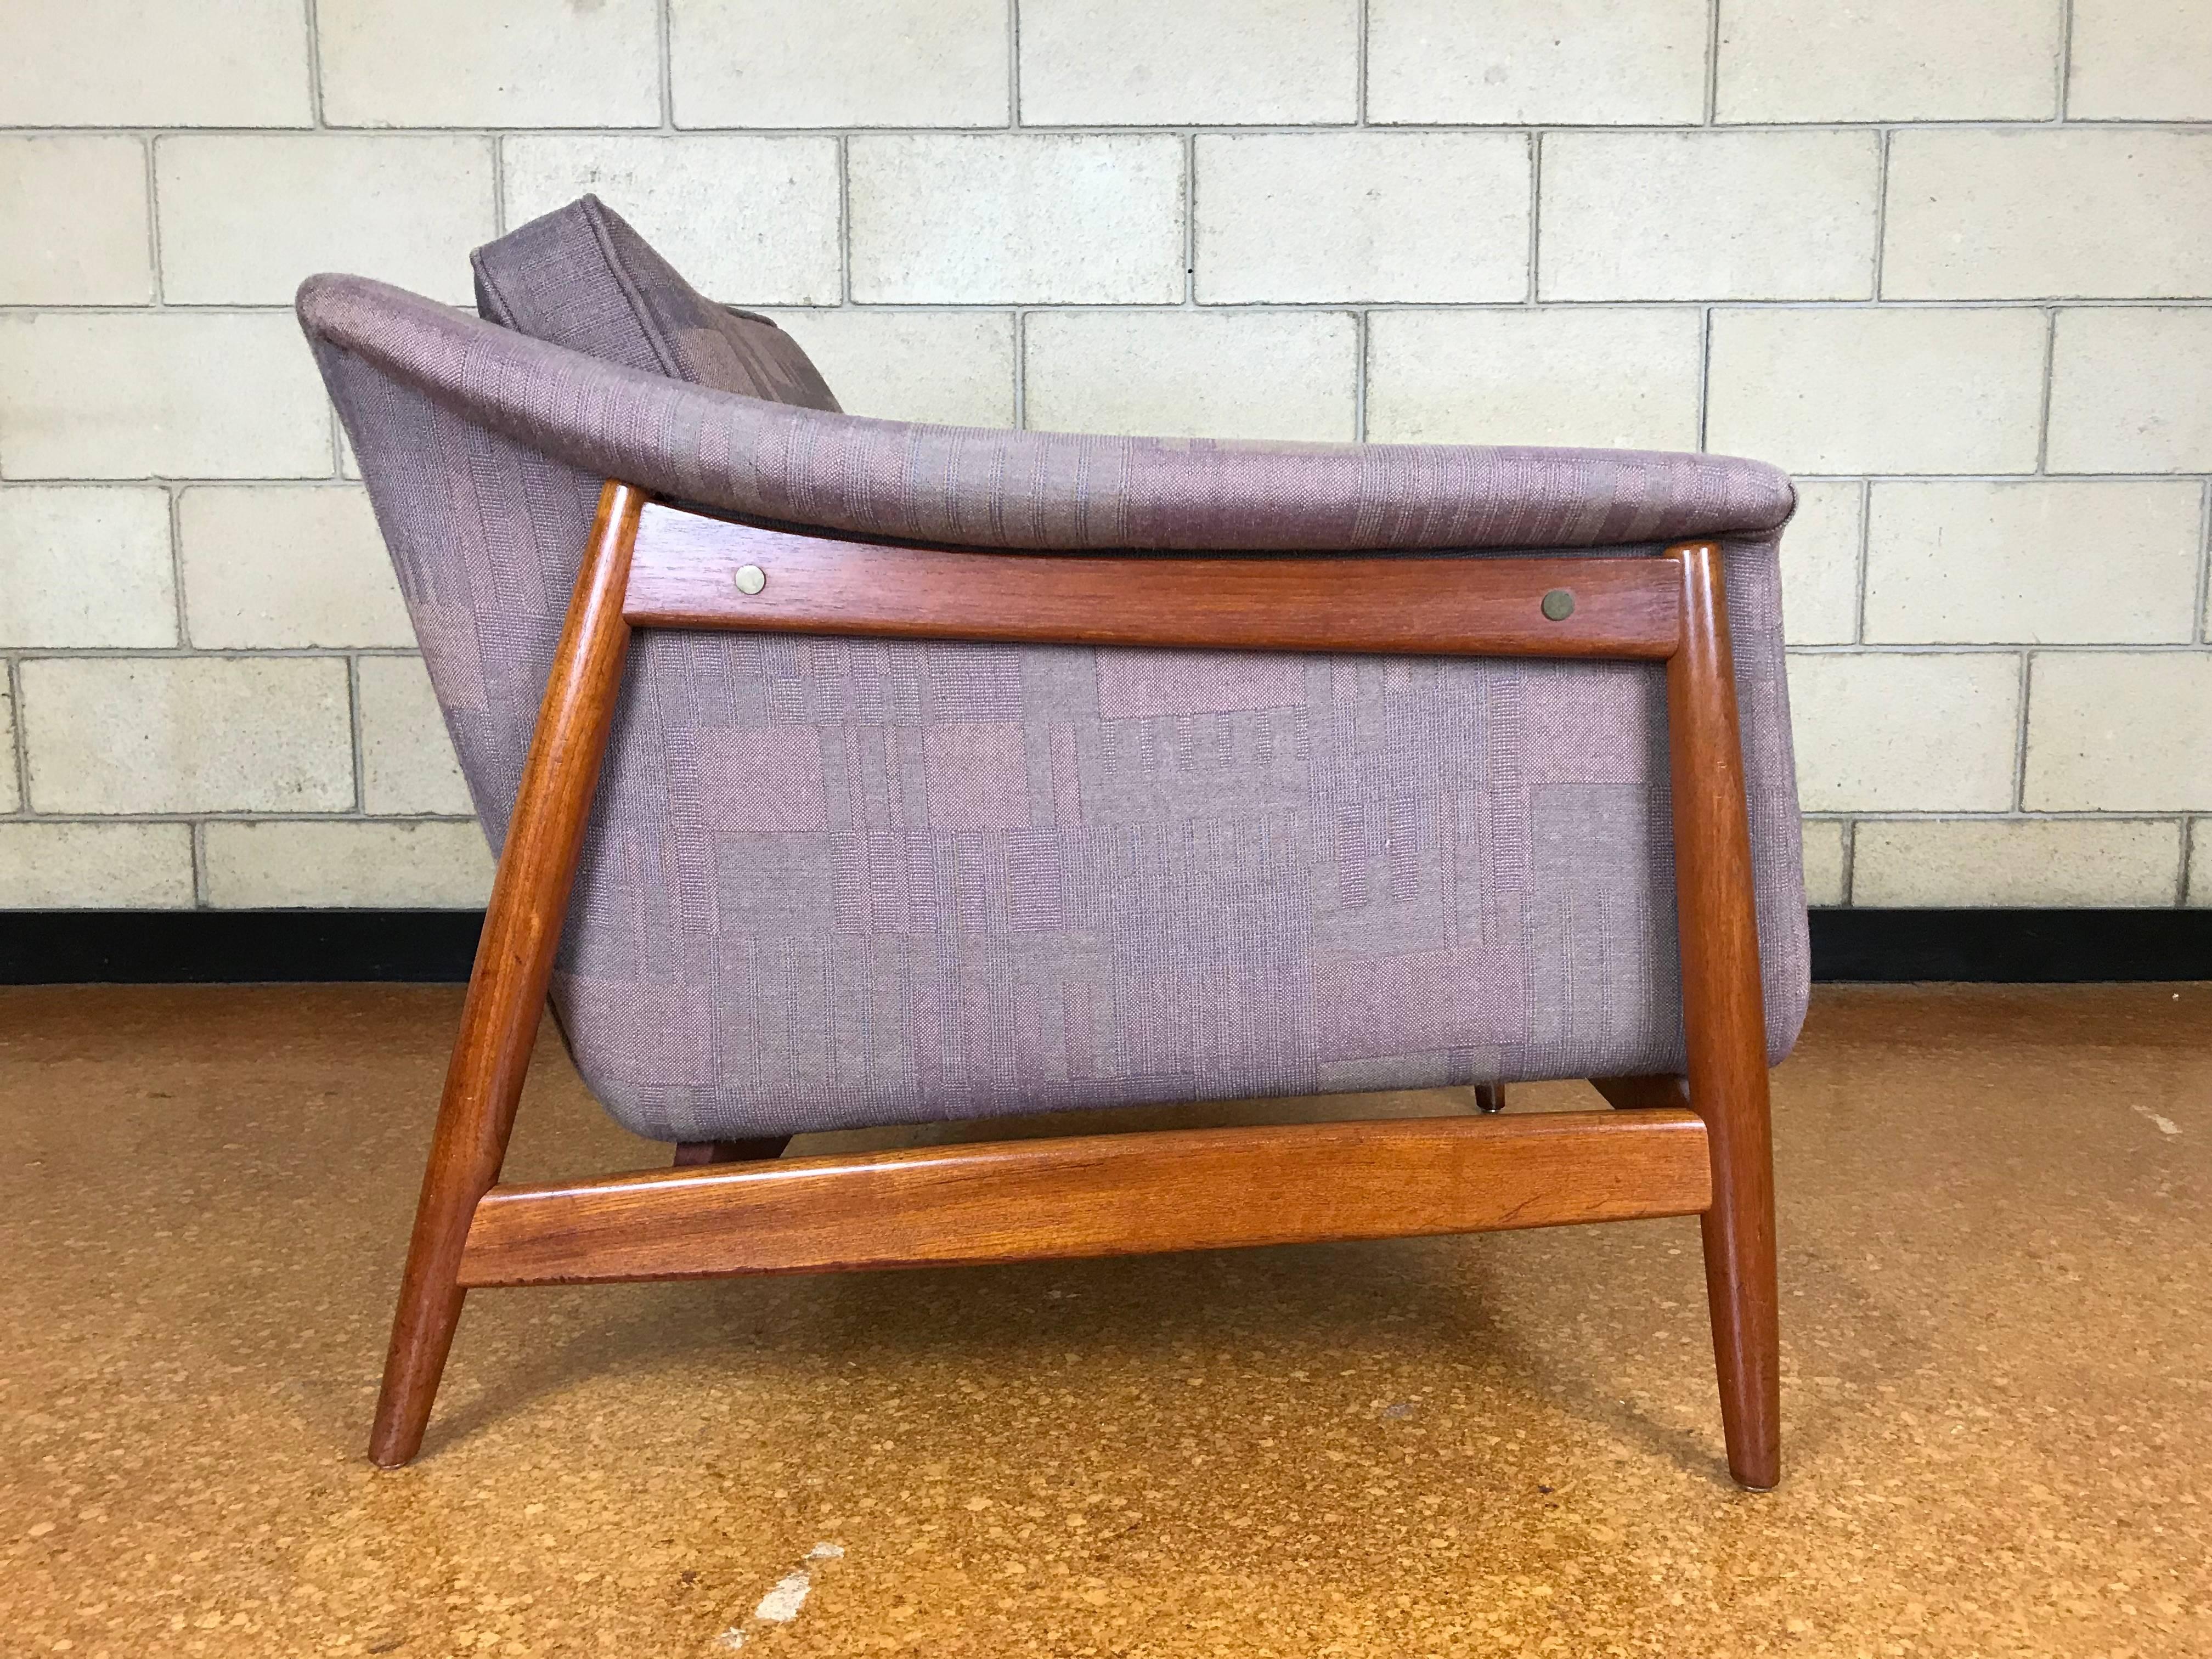 Beautiful and sturdy 'floating' lounge chair designed by Folke Ohlsson for DUX Furniture of Sweden. The legs and frame are made of a combination of teak and rosewood. This is a very solid chair and was reupholstered years ago and needs new